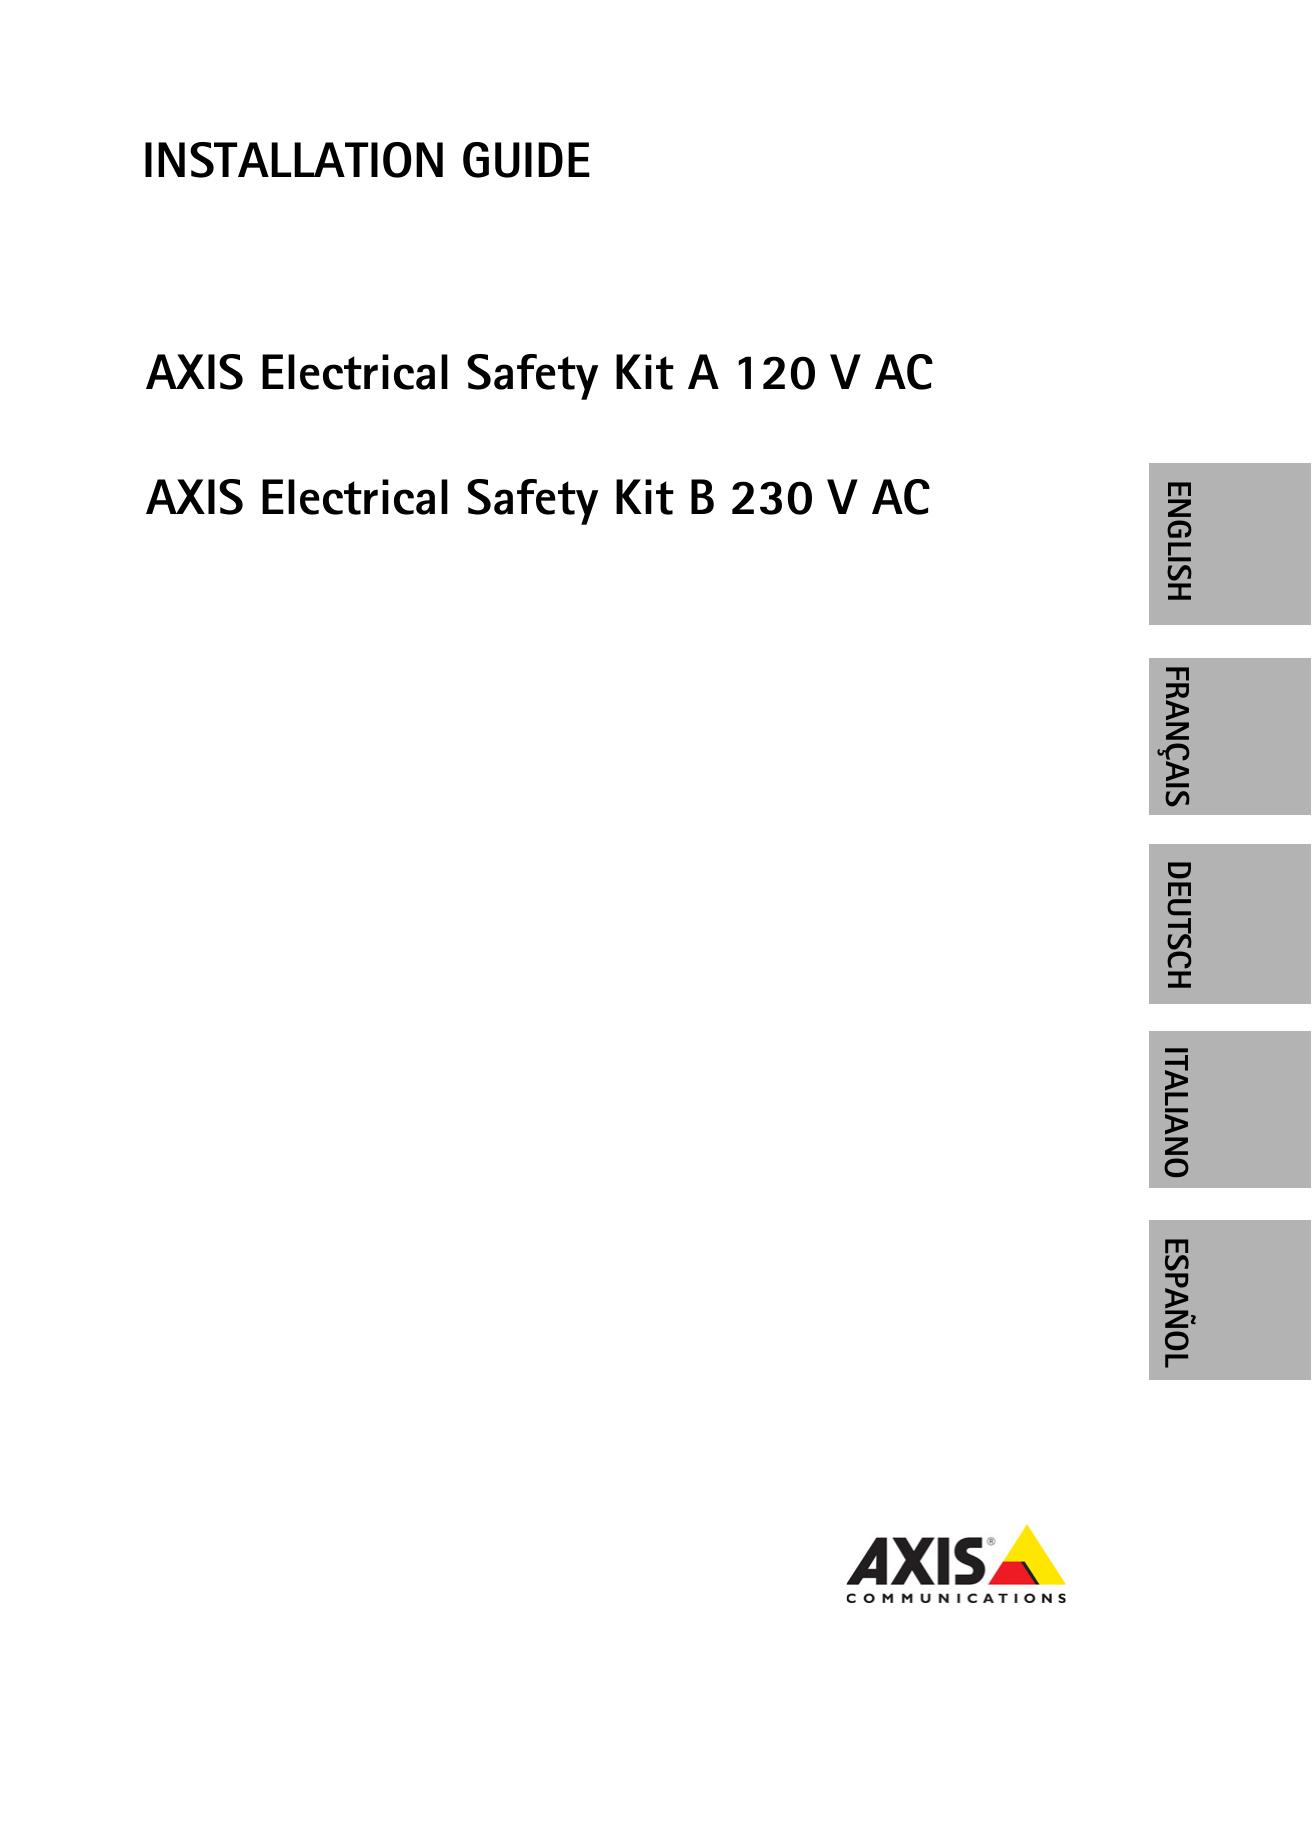 Axis Communications B 230 V AC Marine Safety Devices User Manual